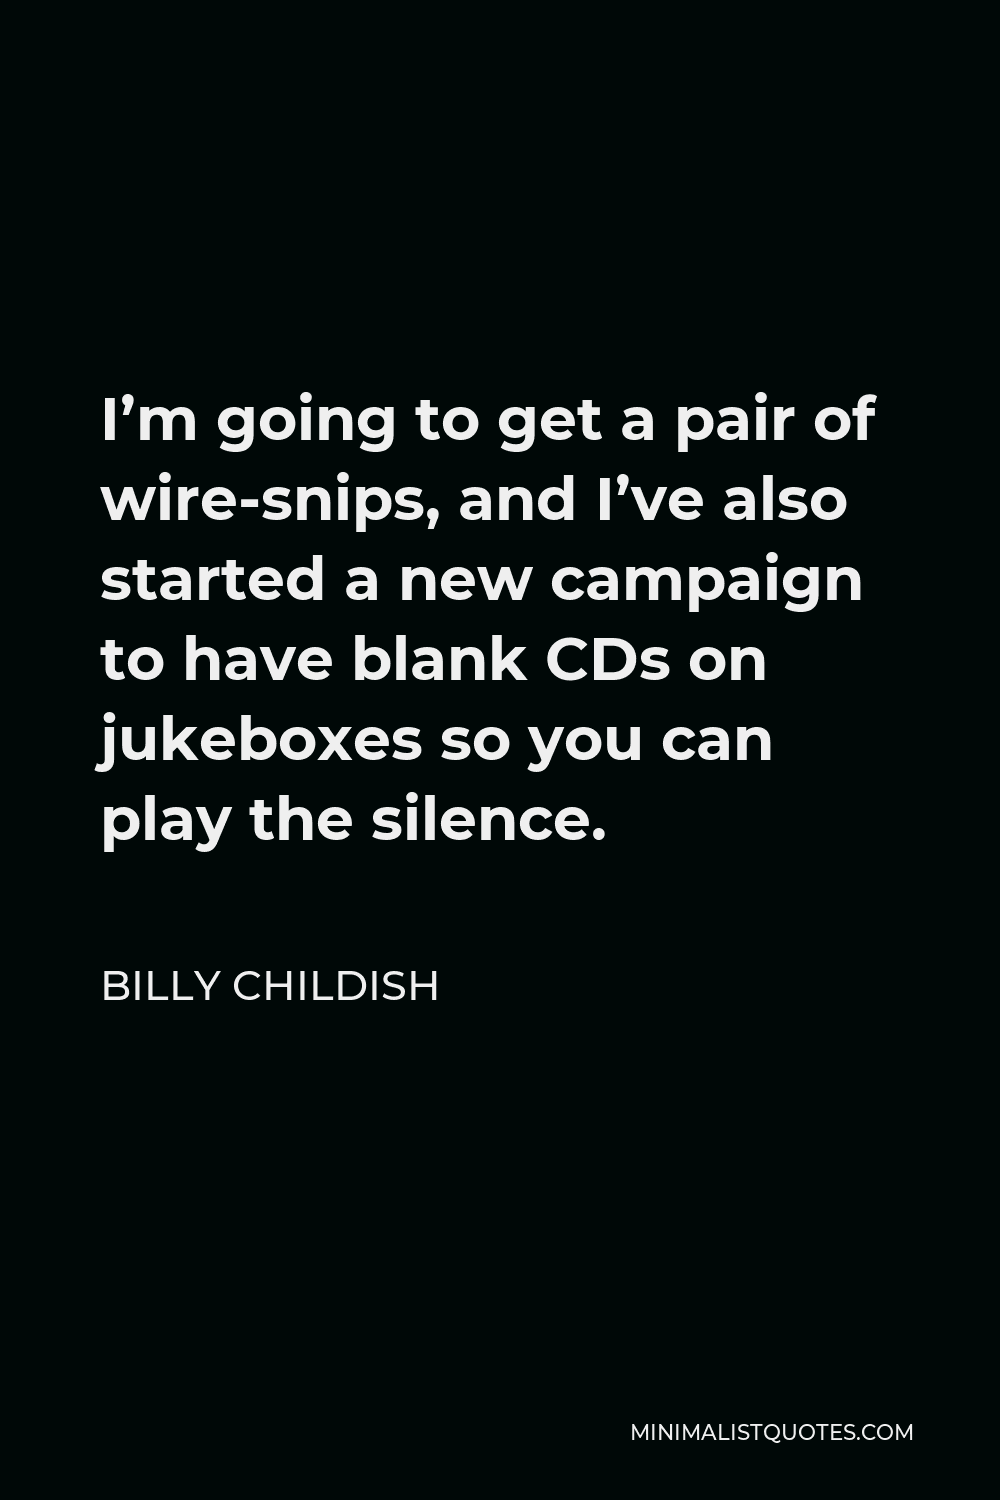 Billy Childish Quote - I’m going to get a pair of wire-snips, and I’ve also started a new campaign to have blank CDs on jukeboxes so you can play the silence.